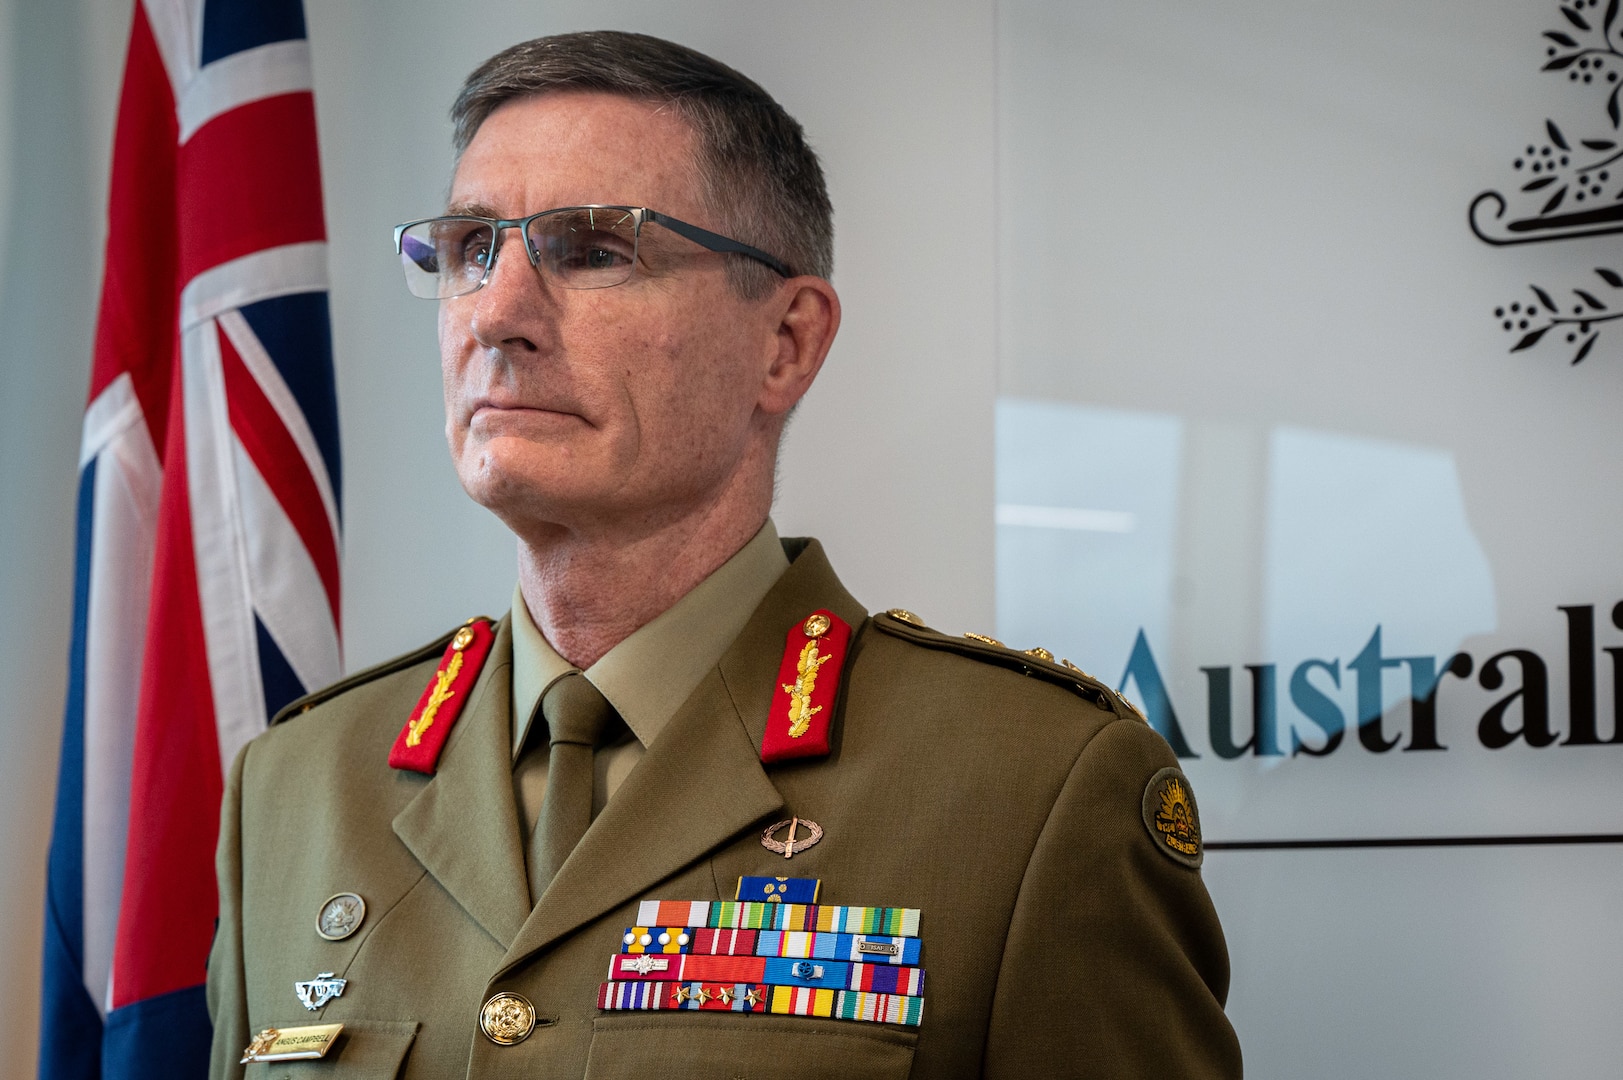 Australia Chief of the Defence Force Gen. Angus Campbell receives the Legion of Merit pinned by Adm. John C. Aquilino, Commander of U.S. Indo-Pacific Command, in Canberra, Australia, on April 8, 2024. The Legion of Merit is the highest accolade that the U.S. can bestow upon a foreign leader; it is reserved for individuals who have shown exceptionally meritorious conduct in the performance of outstanding services. USINDOPACOM is committed to enhancing stability in the Indo-Pacific region by promoting security cooperation, encouraging peaceful development, responding to contingencies, deterring aggression and, when necessary, fighting to win. (U.S. Navy photo by Chief Mass Communication Specialist Shannon M. Smith)